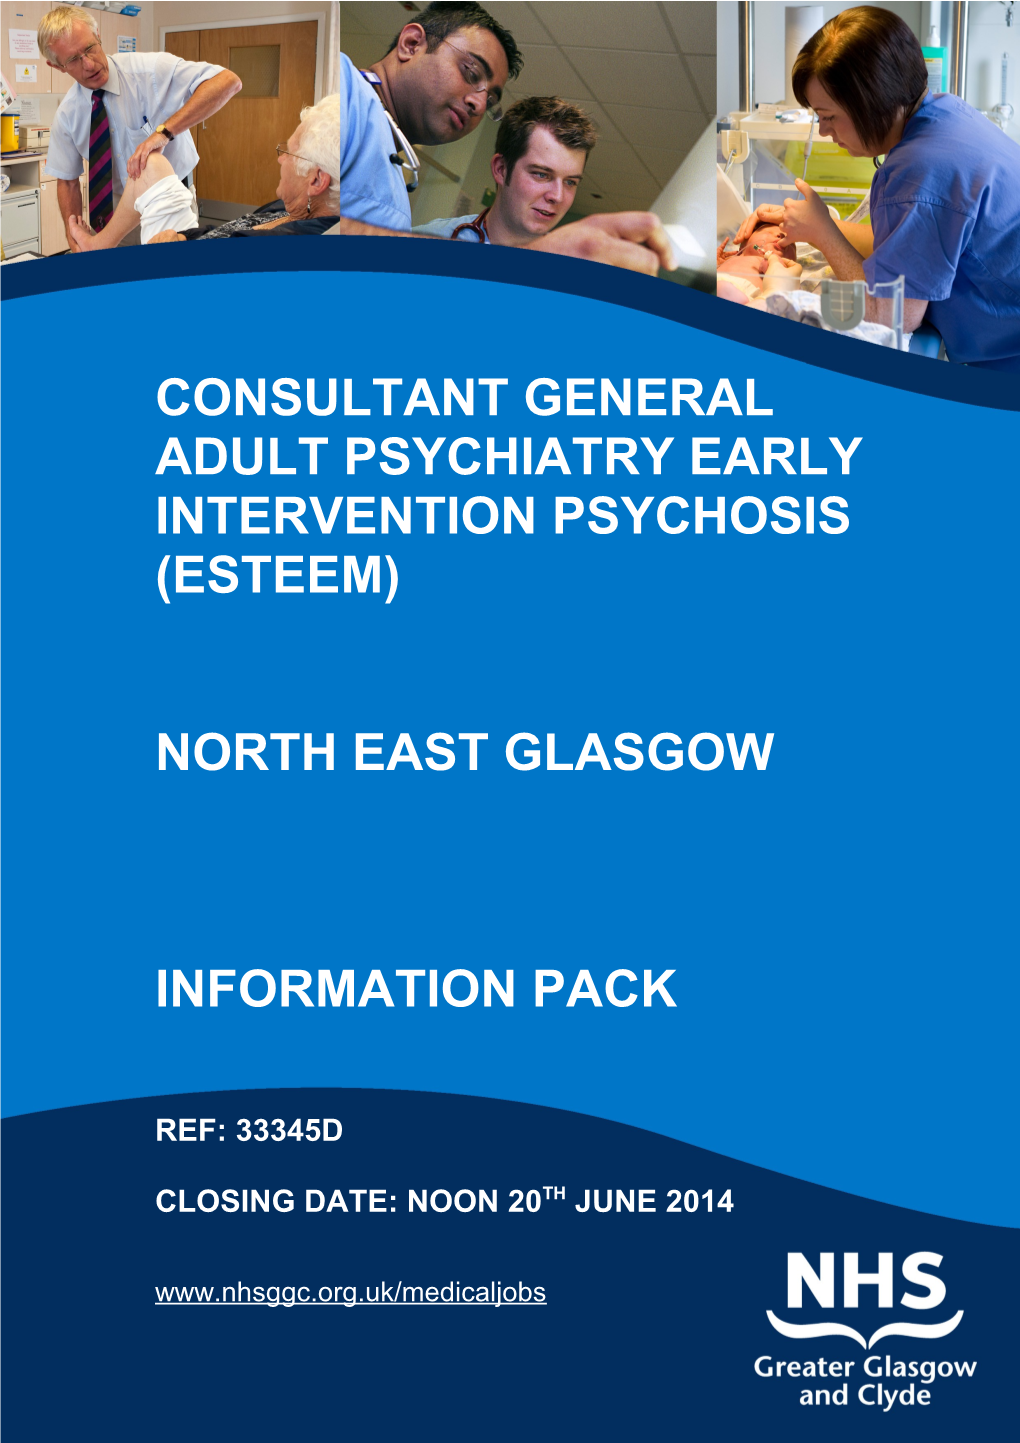 Consultant General Adult Psychiatry EARLY